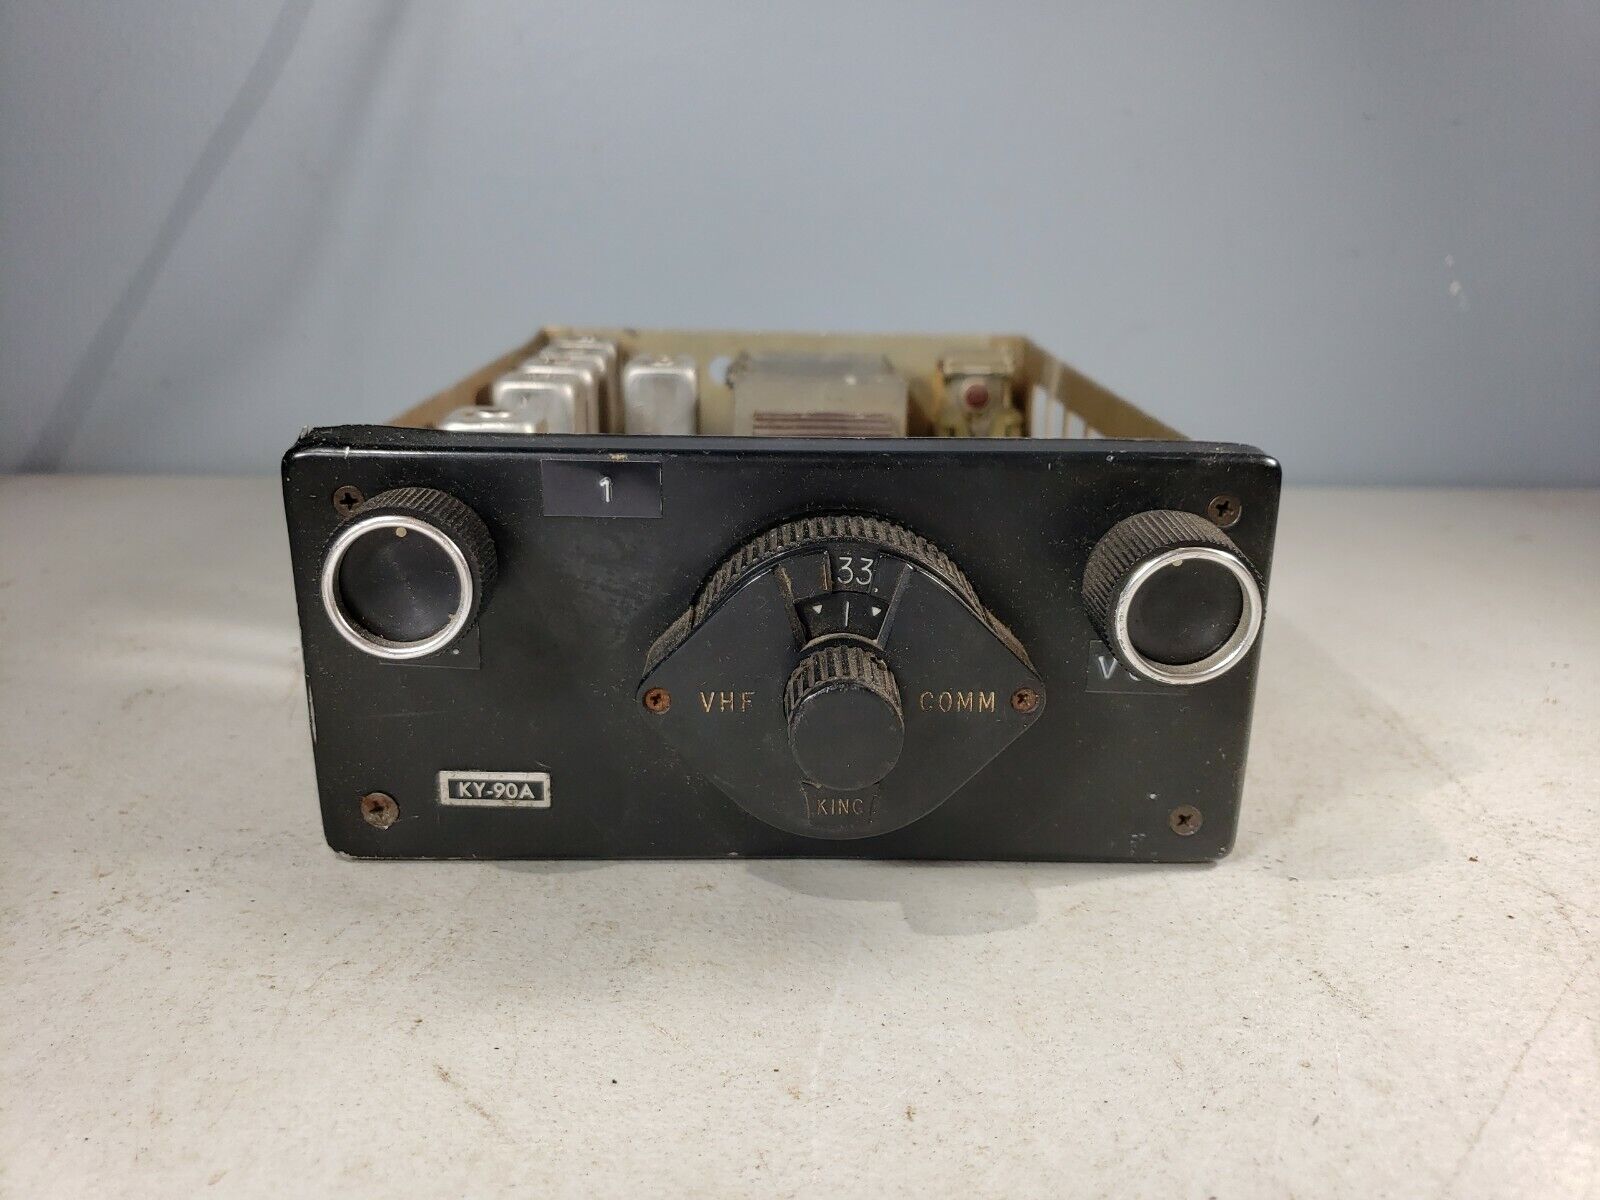 Vintage Aviation Radio KING VHF COMM KY-90A untested 1960s